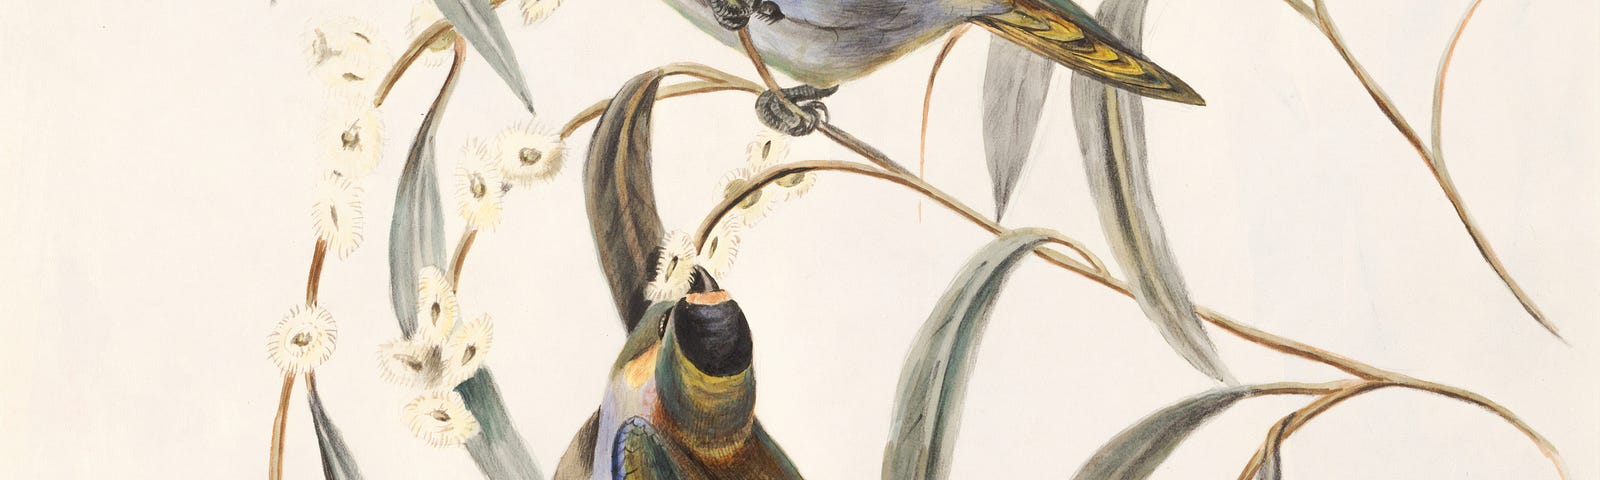 A picture in tans and browns and a bit of yellow showing two birds, one above on a branch with a twig in its mouth and a bird below looking up at it.